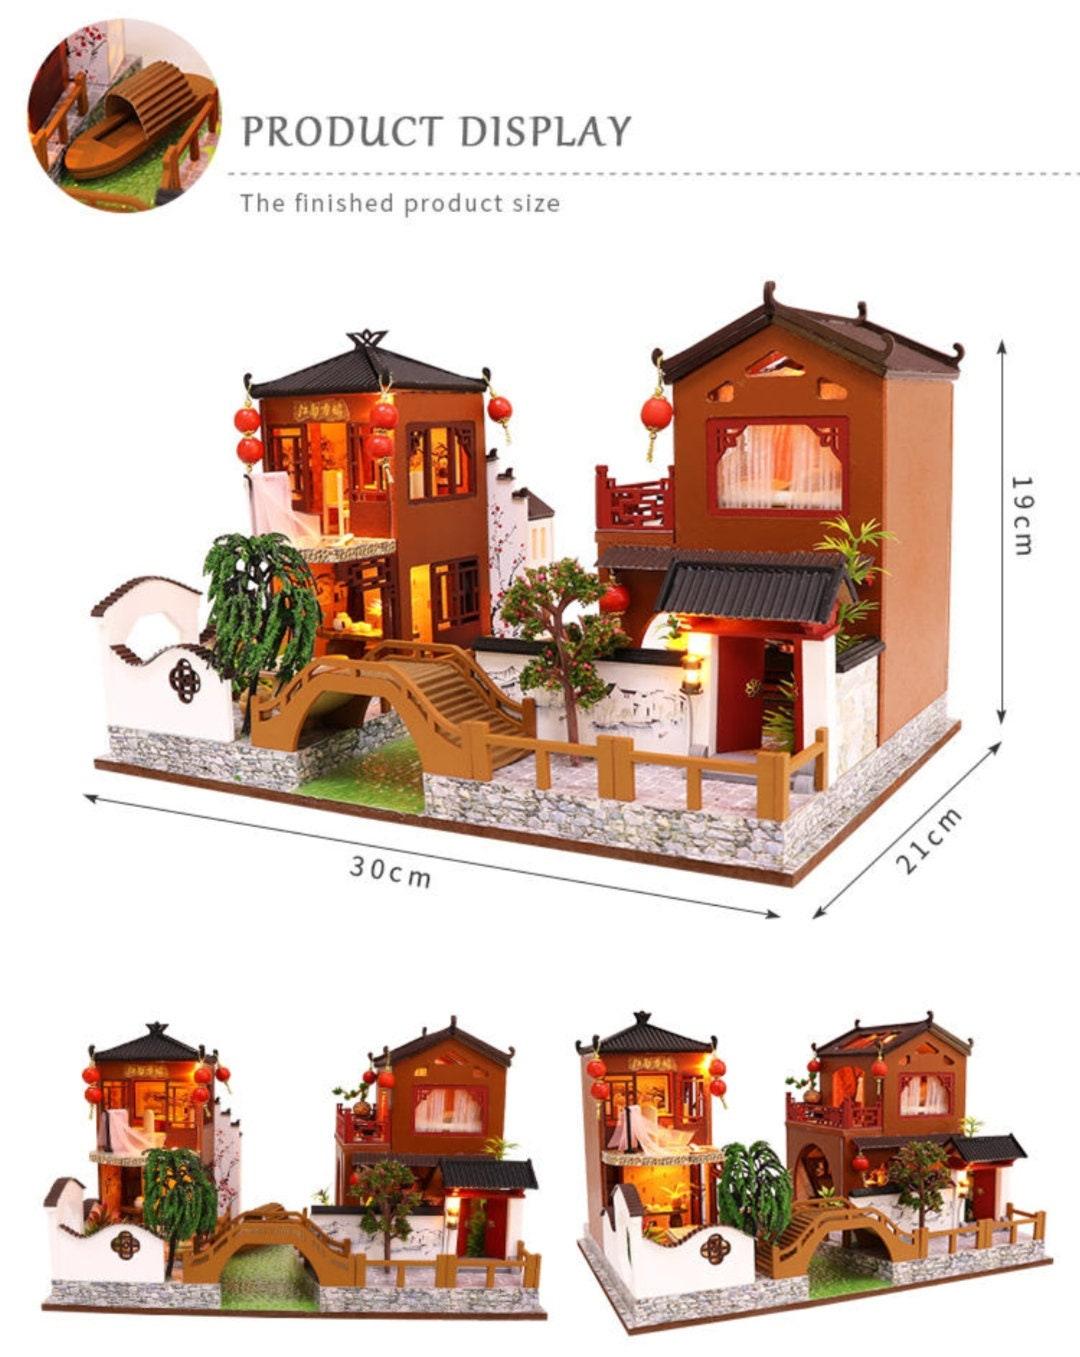 DIY Dollhouse Classical Chinese Style Miniature Doll House kit Large Scale with light Adult Craft Gift Decor - Rajbharti Crafts